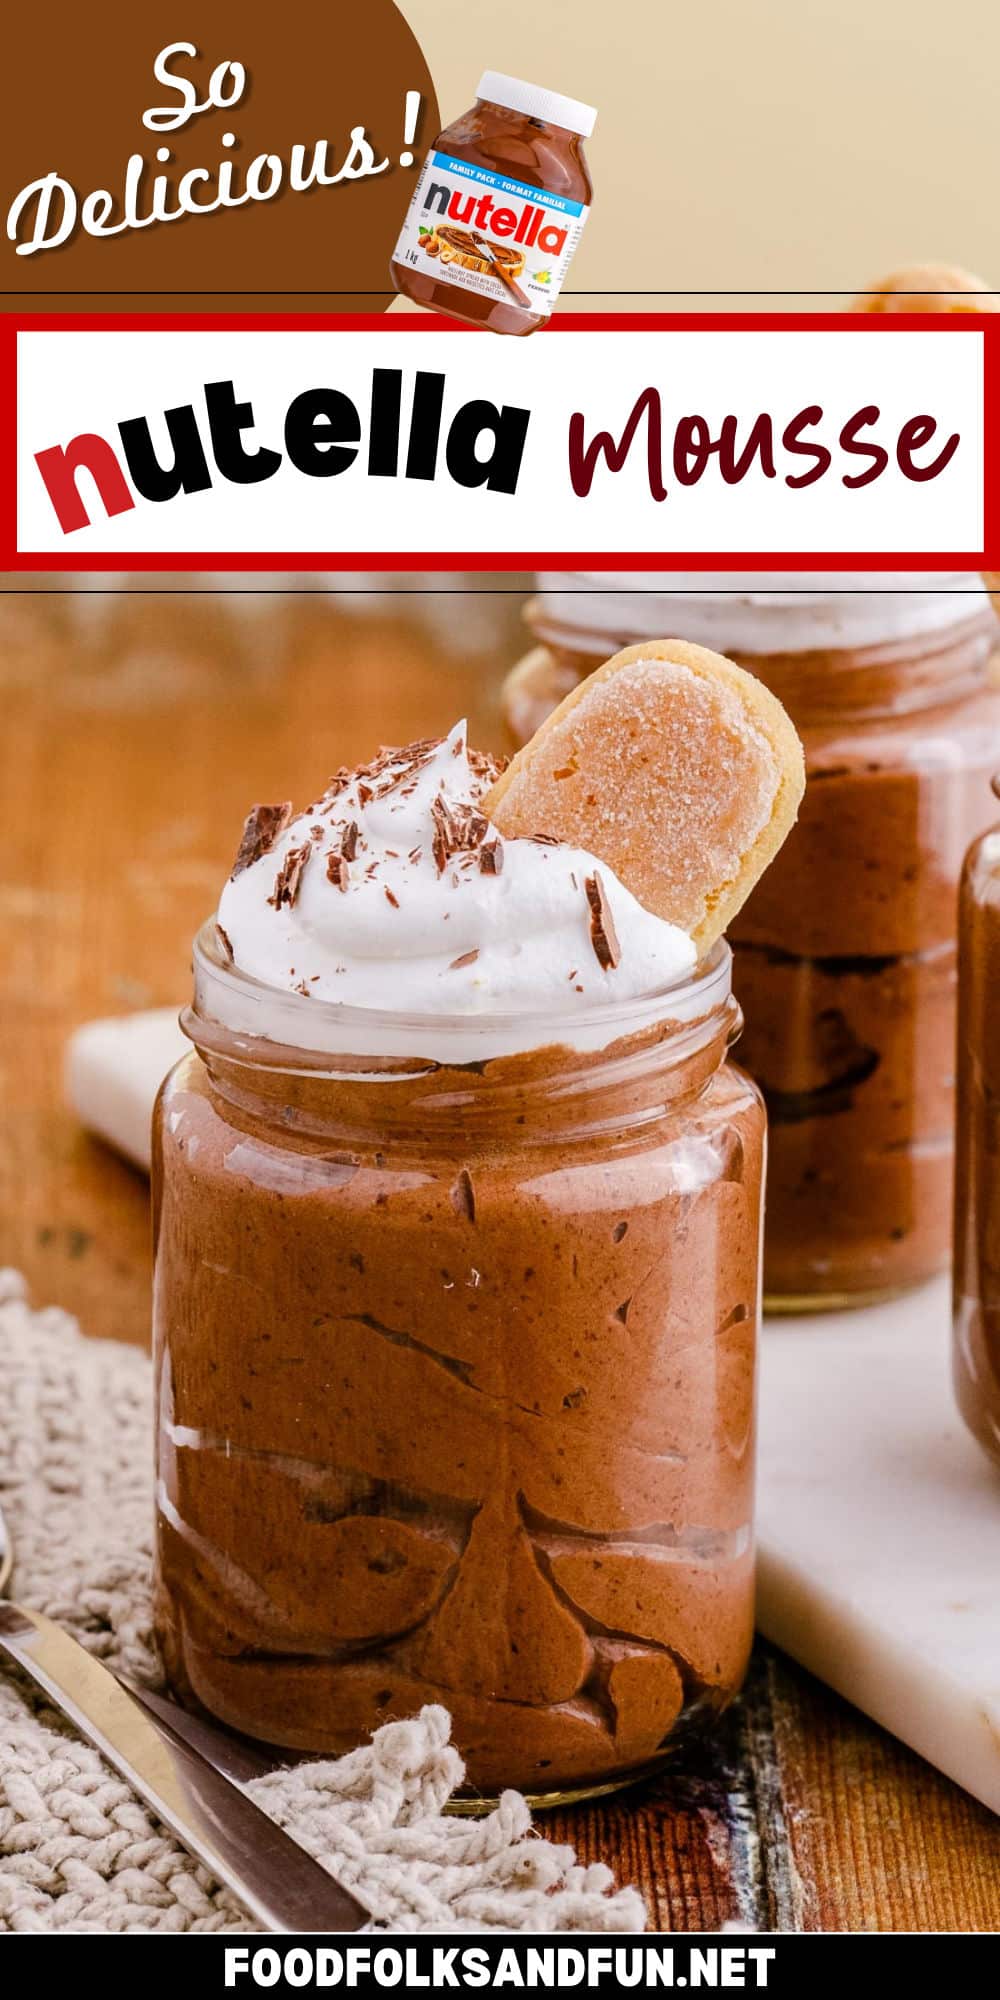 This Nutella Mousse is an easy dessert that takes 20 minutes of active prep time to make! It’s one of my favorite desserts to serve to company. via @foodfolksandfun